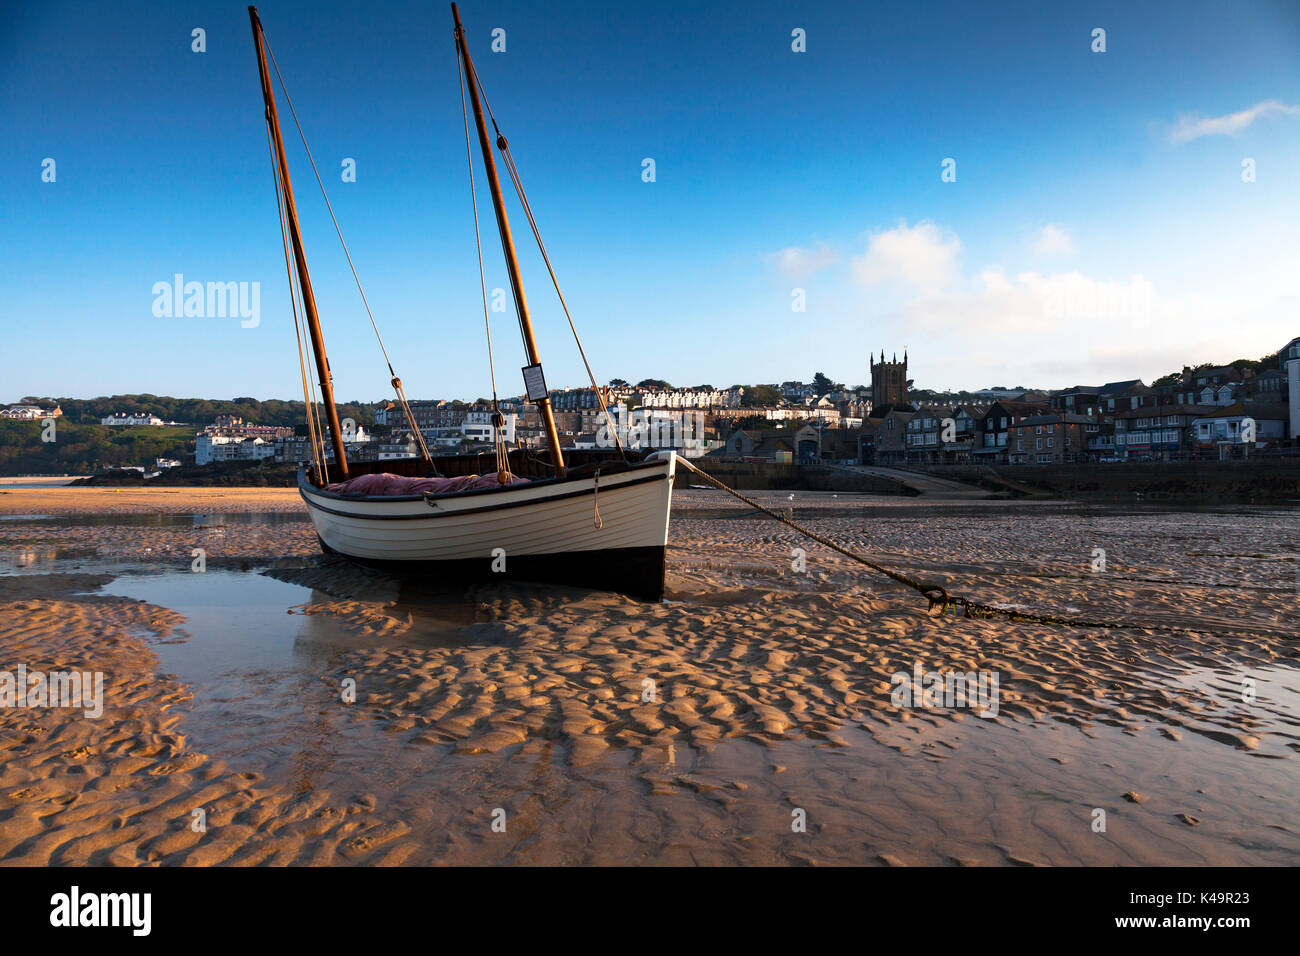 Boat In Harbor, Low Tide, St Ives, Cornwall, England, Uk Stock Photo